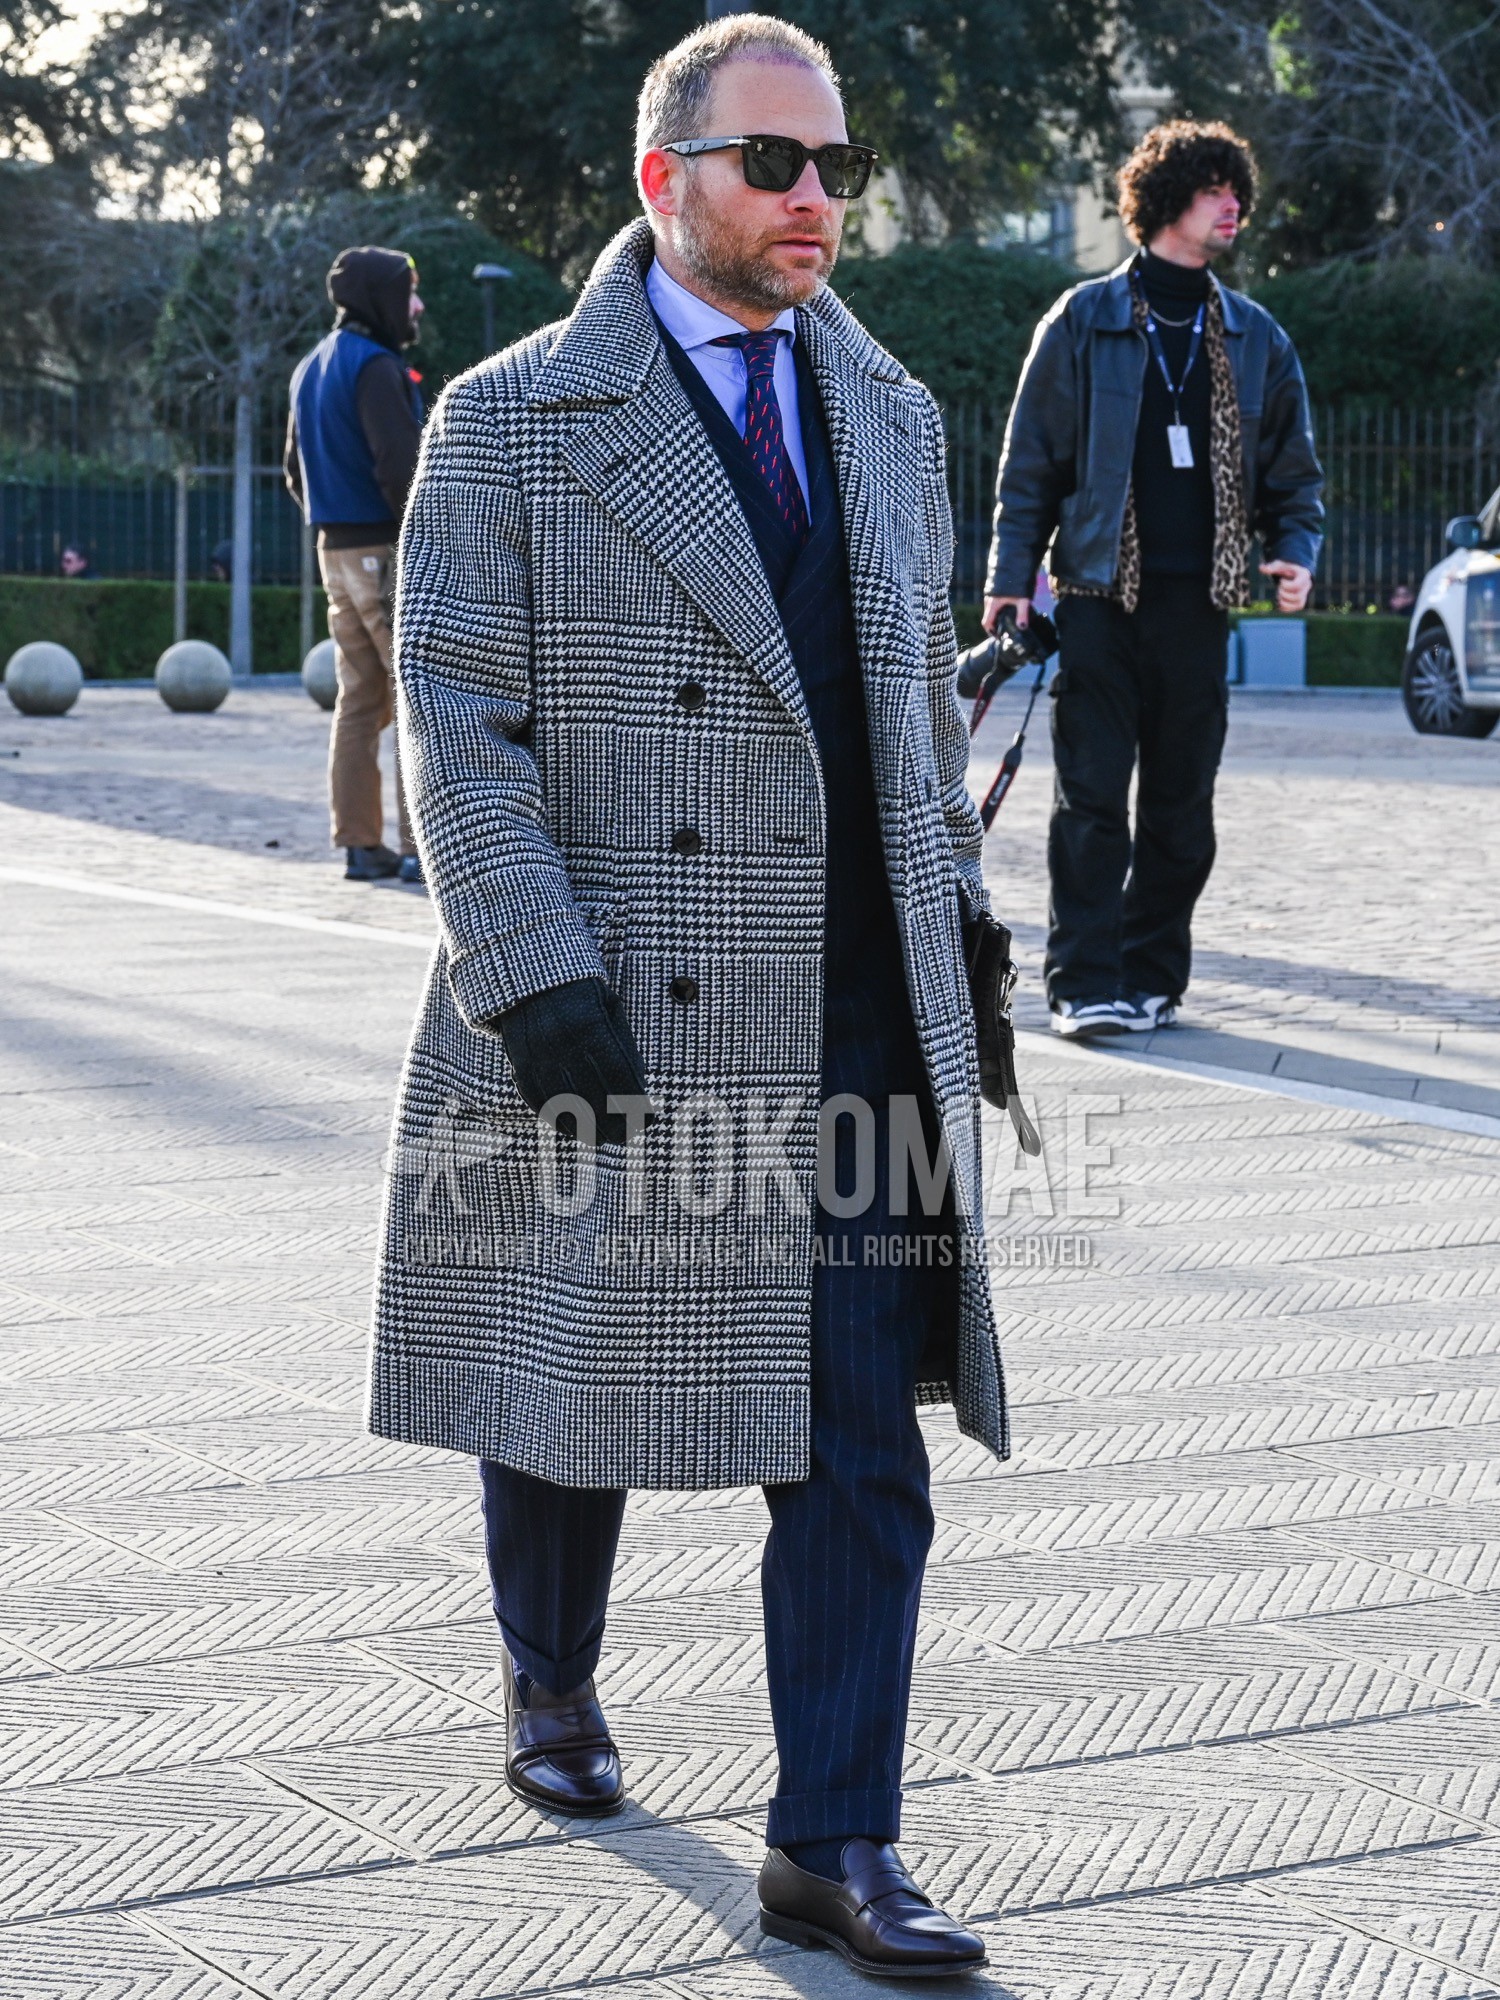 Men's autumn winter outfit with black plain sunglasses, gray check ulster coat, blue plain shirt, navy plain socks, brown coin loafers leather shoes, navy stripes suit, navy graphic necktie.